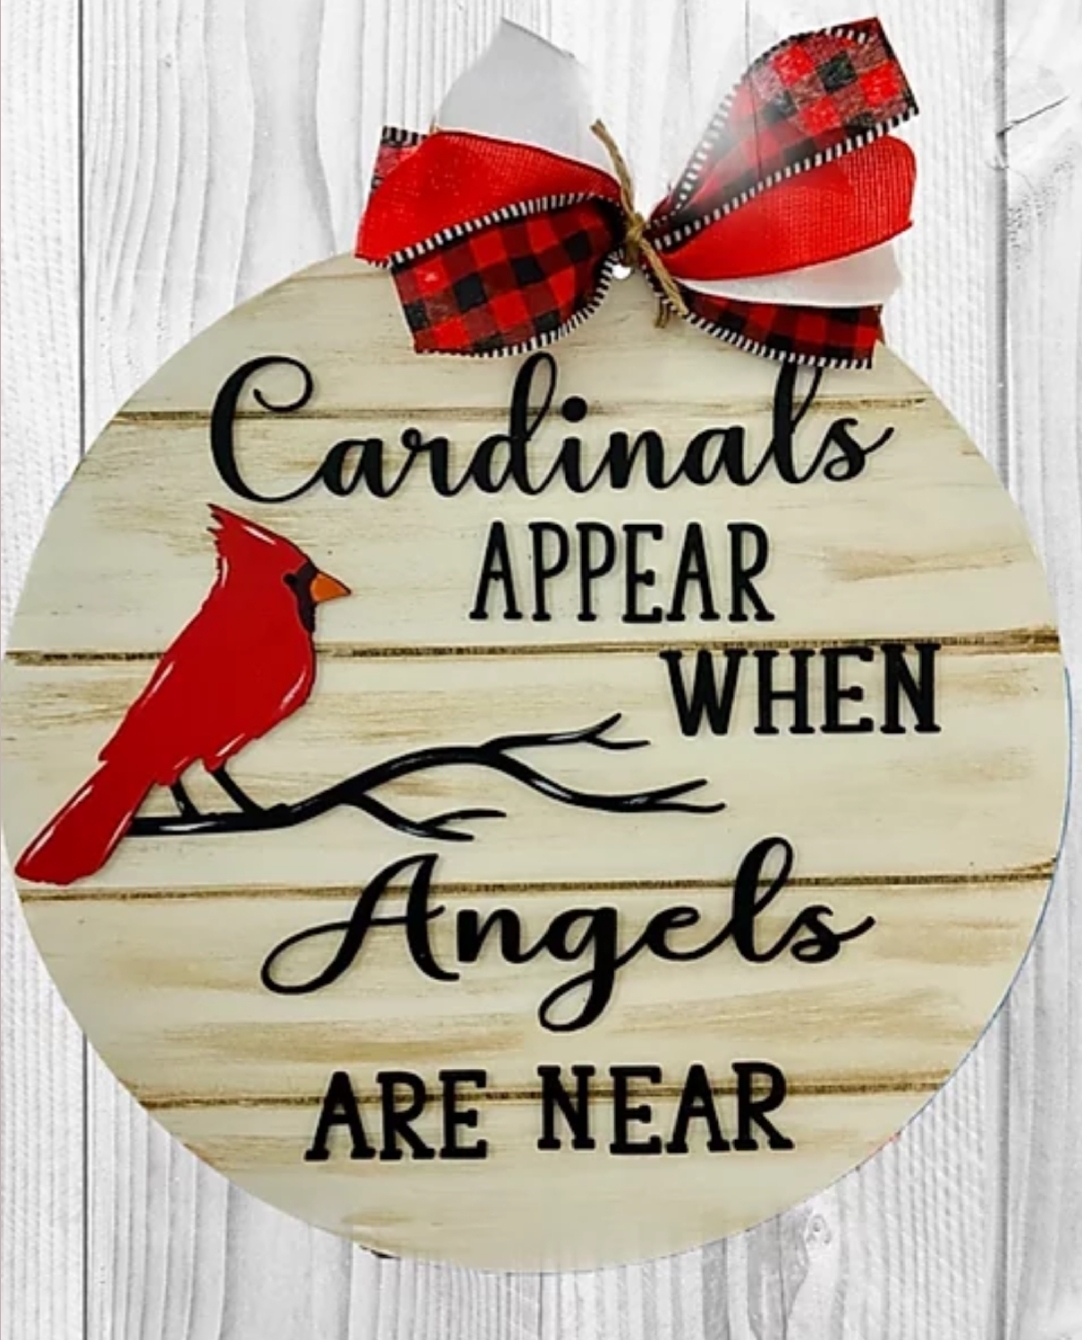 Cardinals Appear When Angels Are Near 